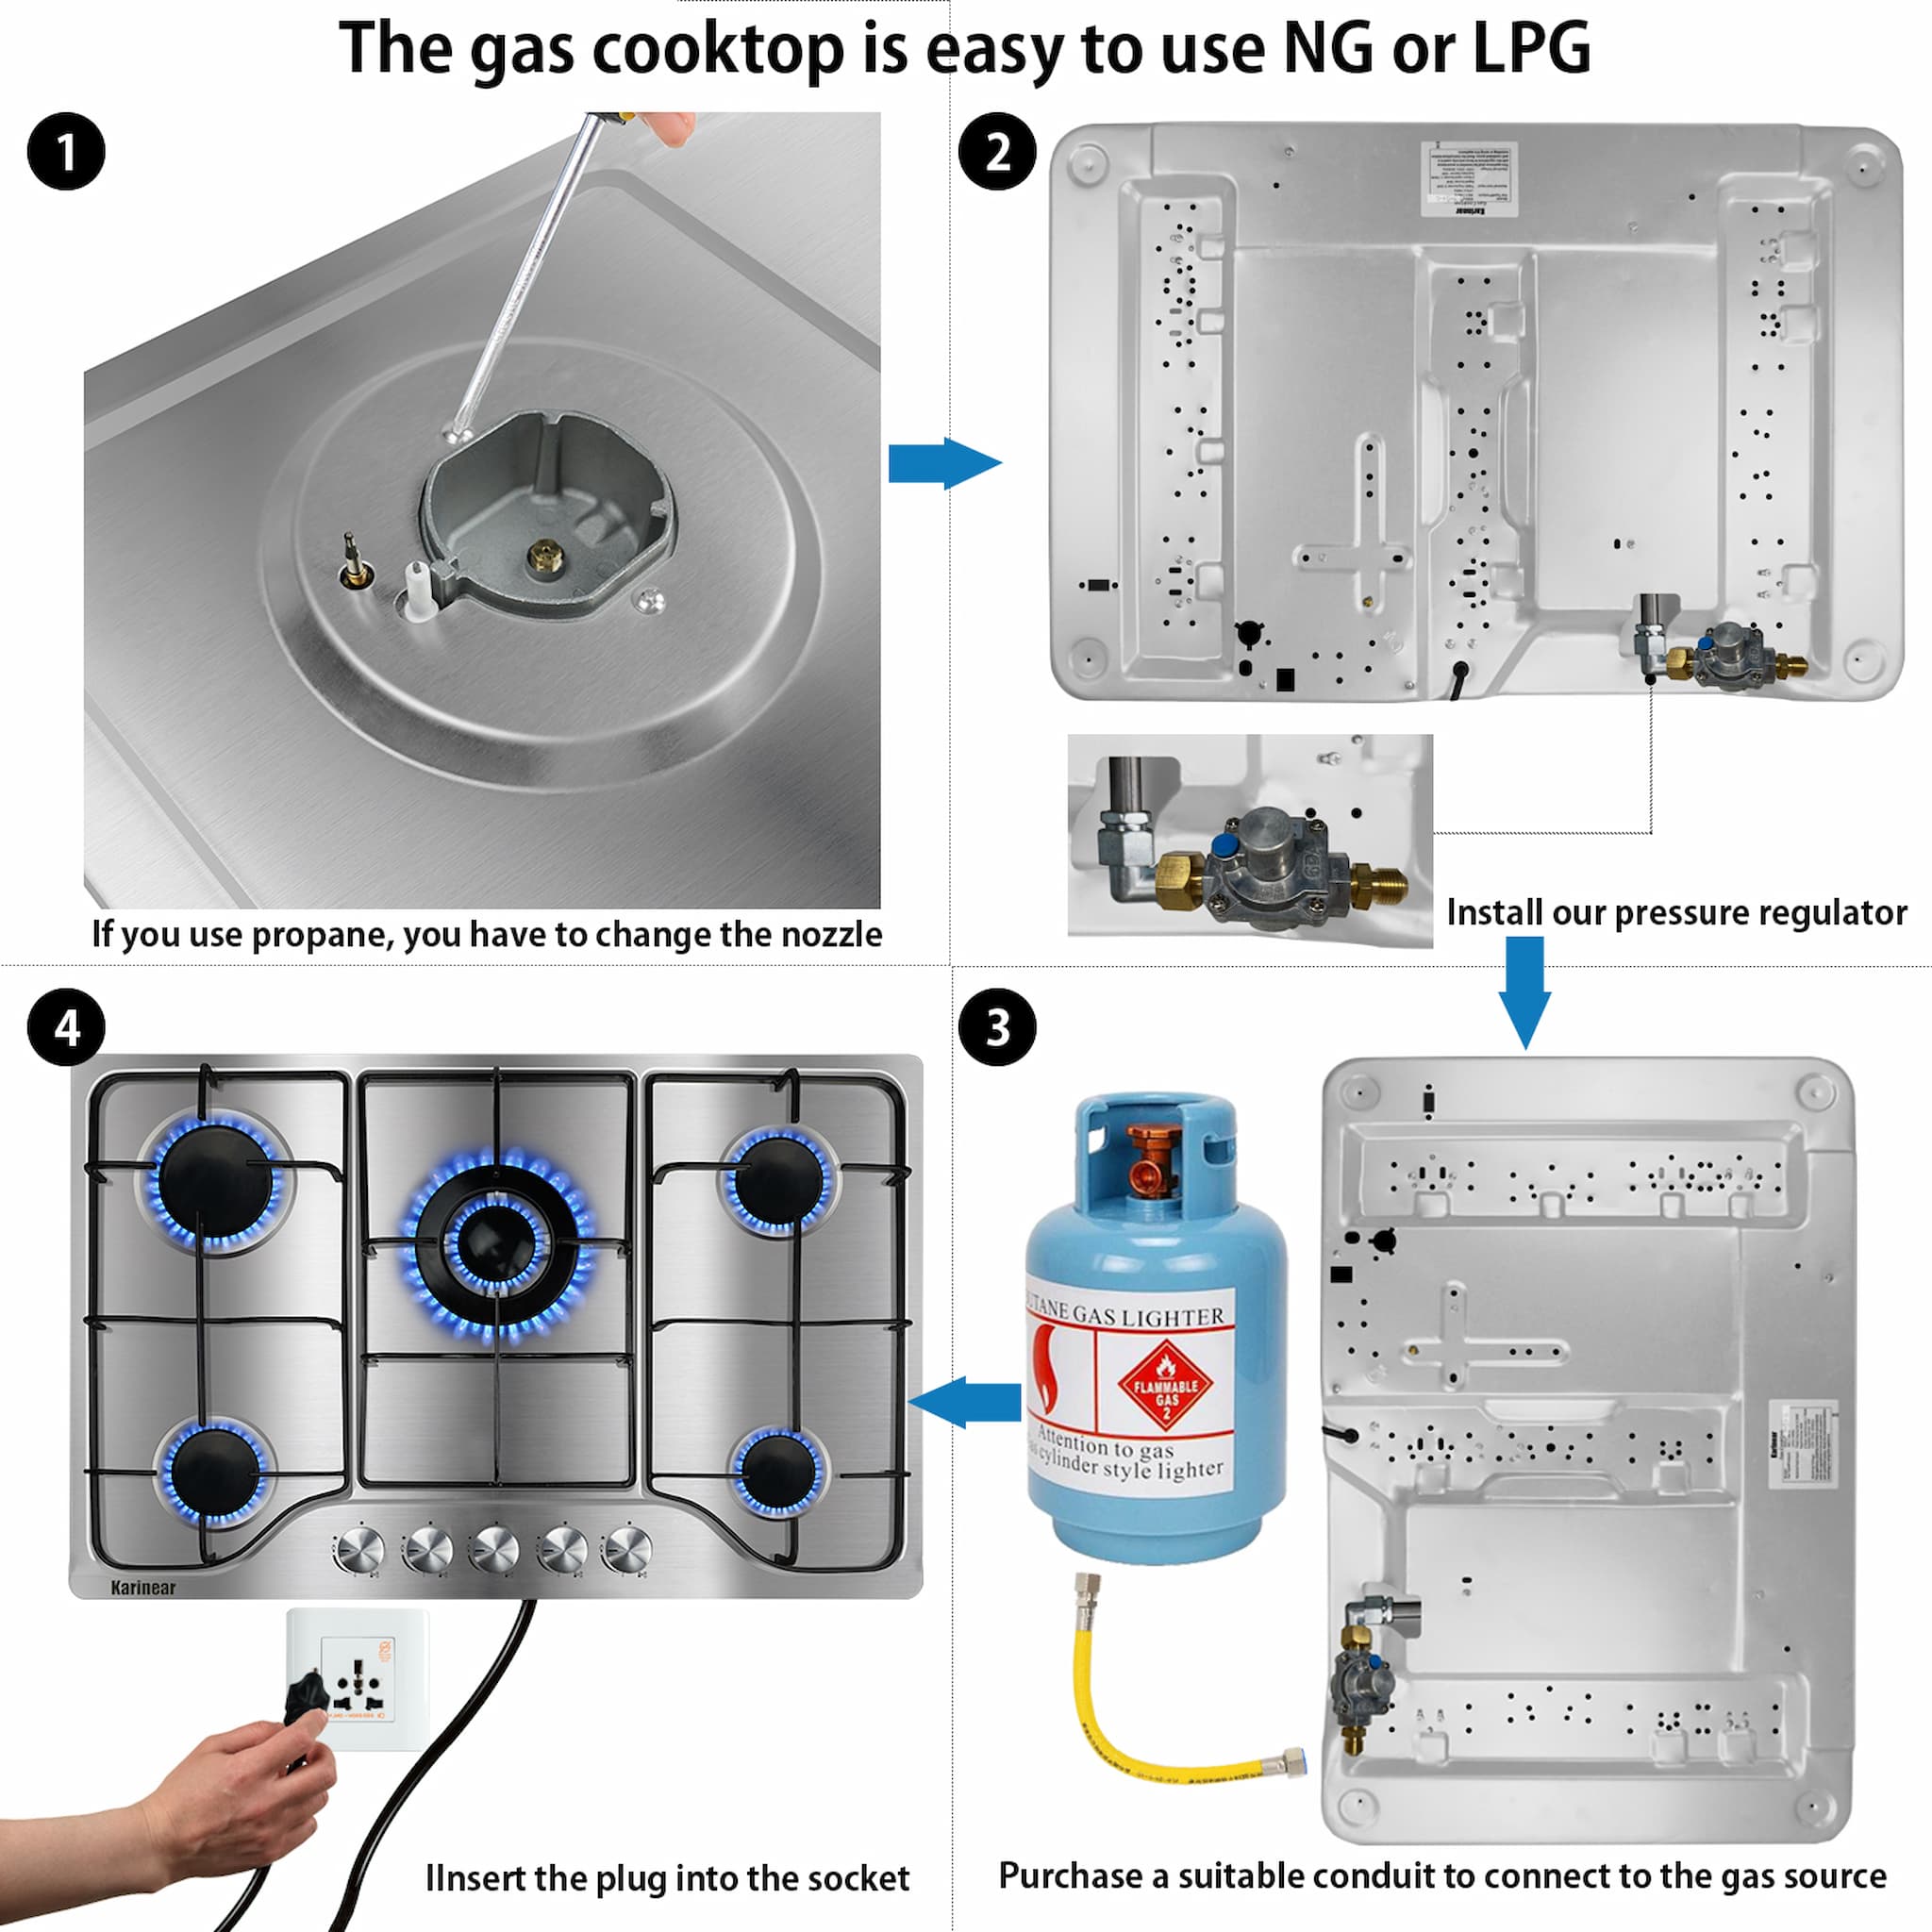 The 30 inch ng/lpg gas cooktop is easy to install. The package contains a pressure regulator and propane conversion kit. Note:The initial setting of the dual fuel gas cooktop is for natural gas. If you want to use propane, you have to replace the burner nozzle.